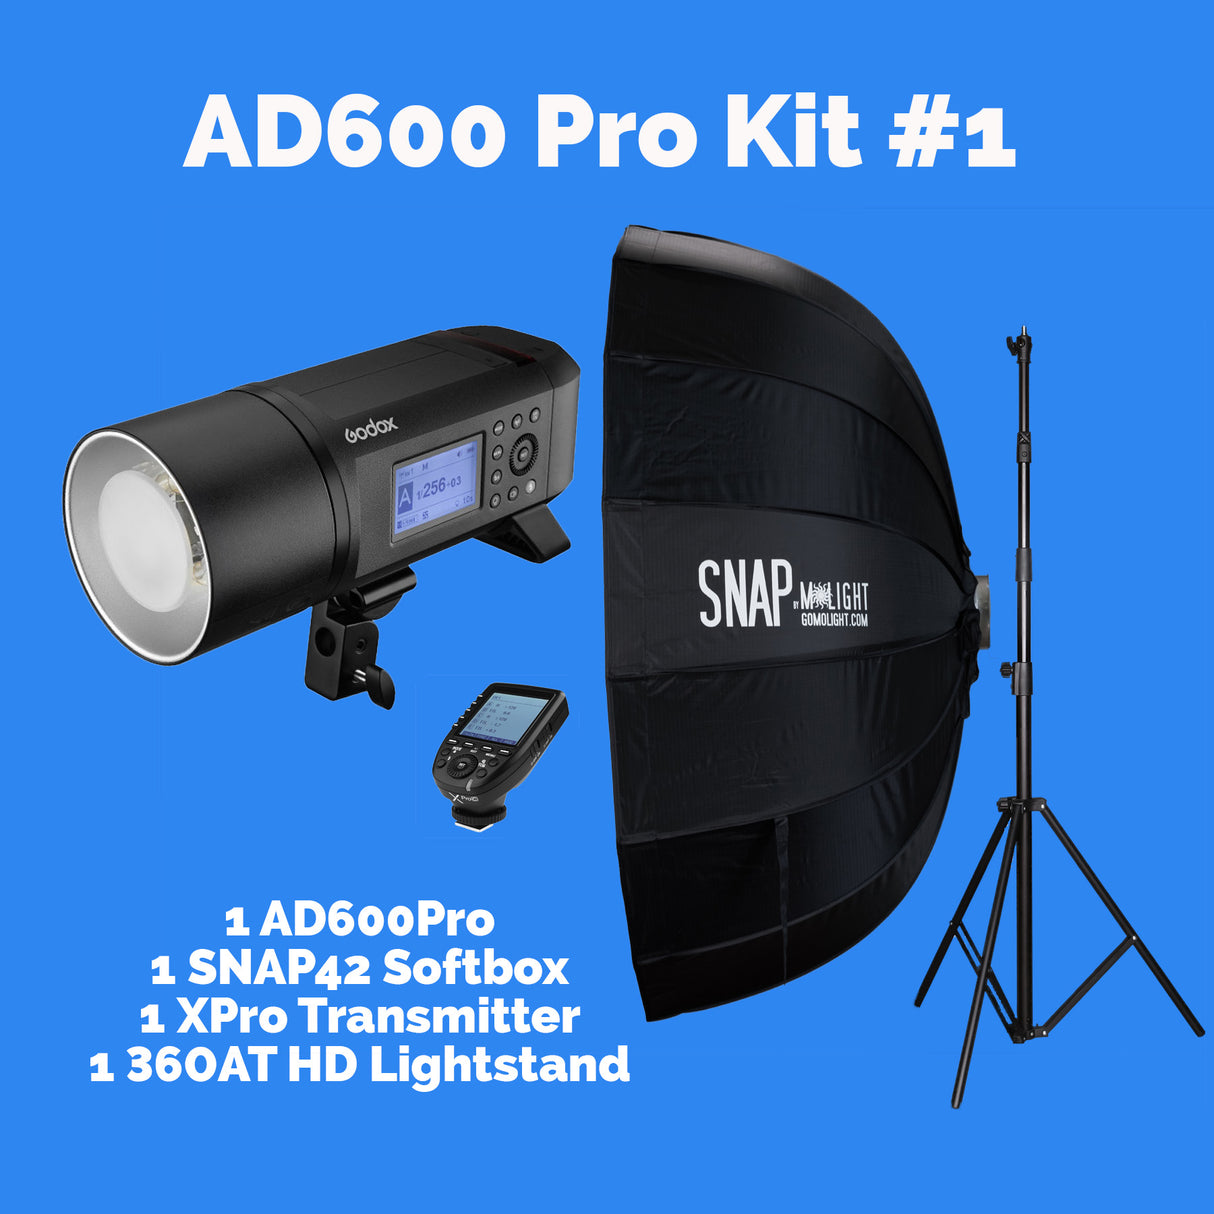 AD600Pro Kit #1 with SNAP42